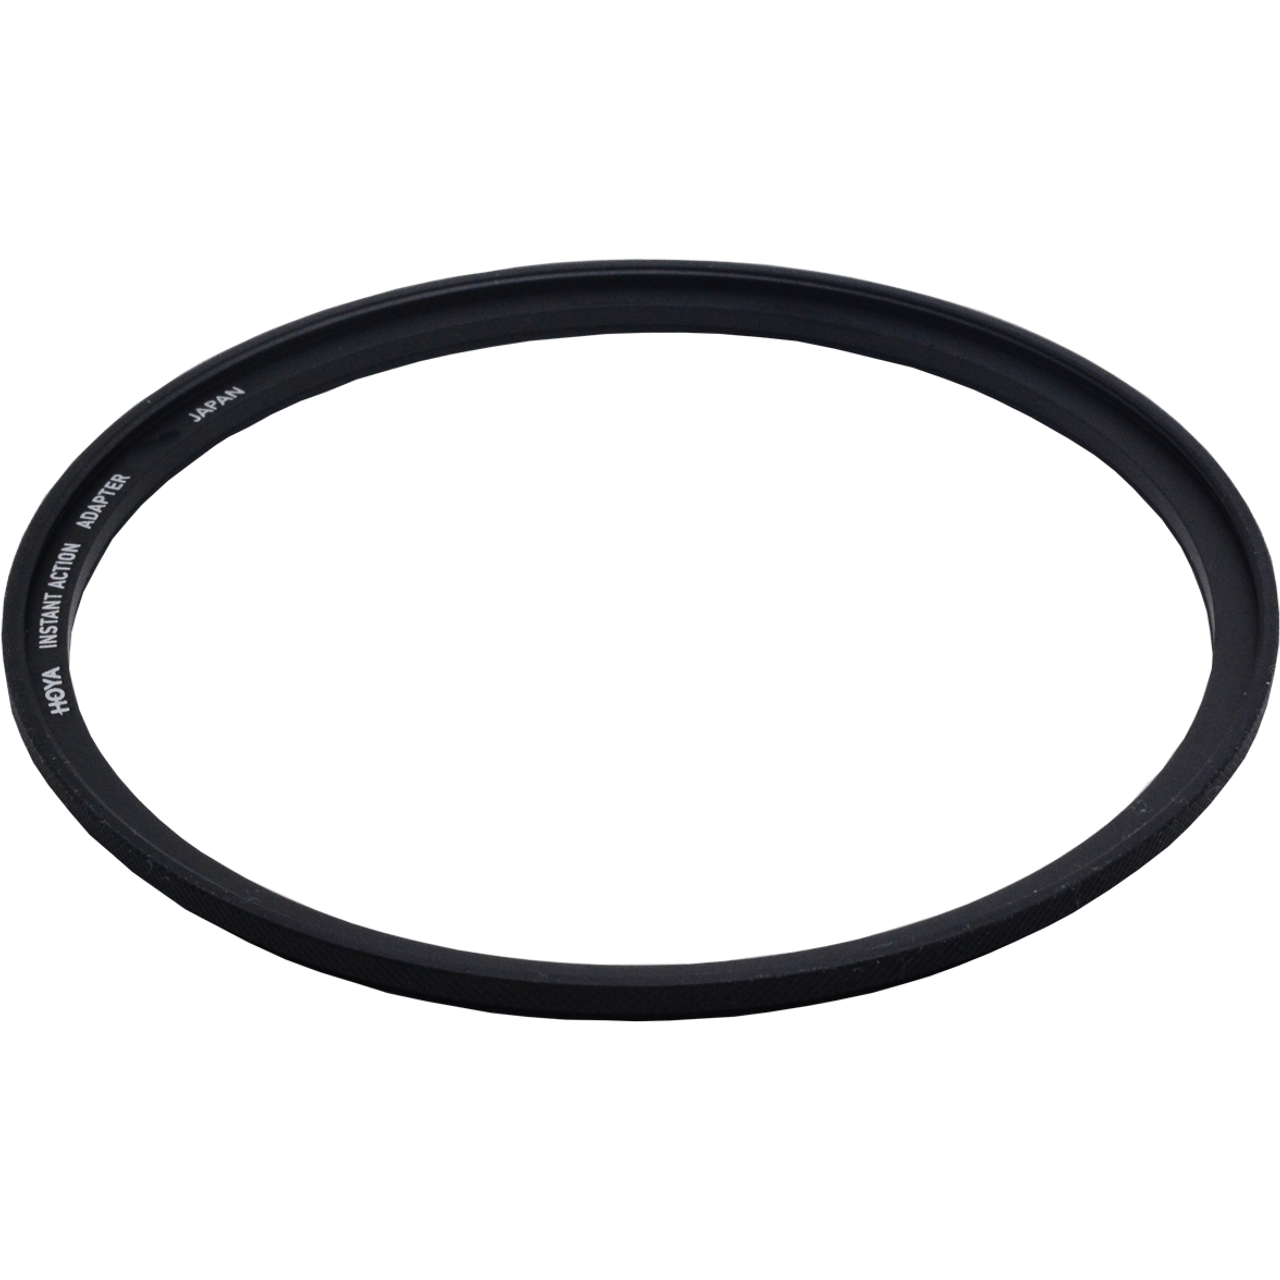 HOYA INSTANT ACTION ADAPTER RING (49MM)